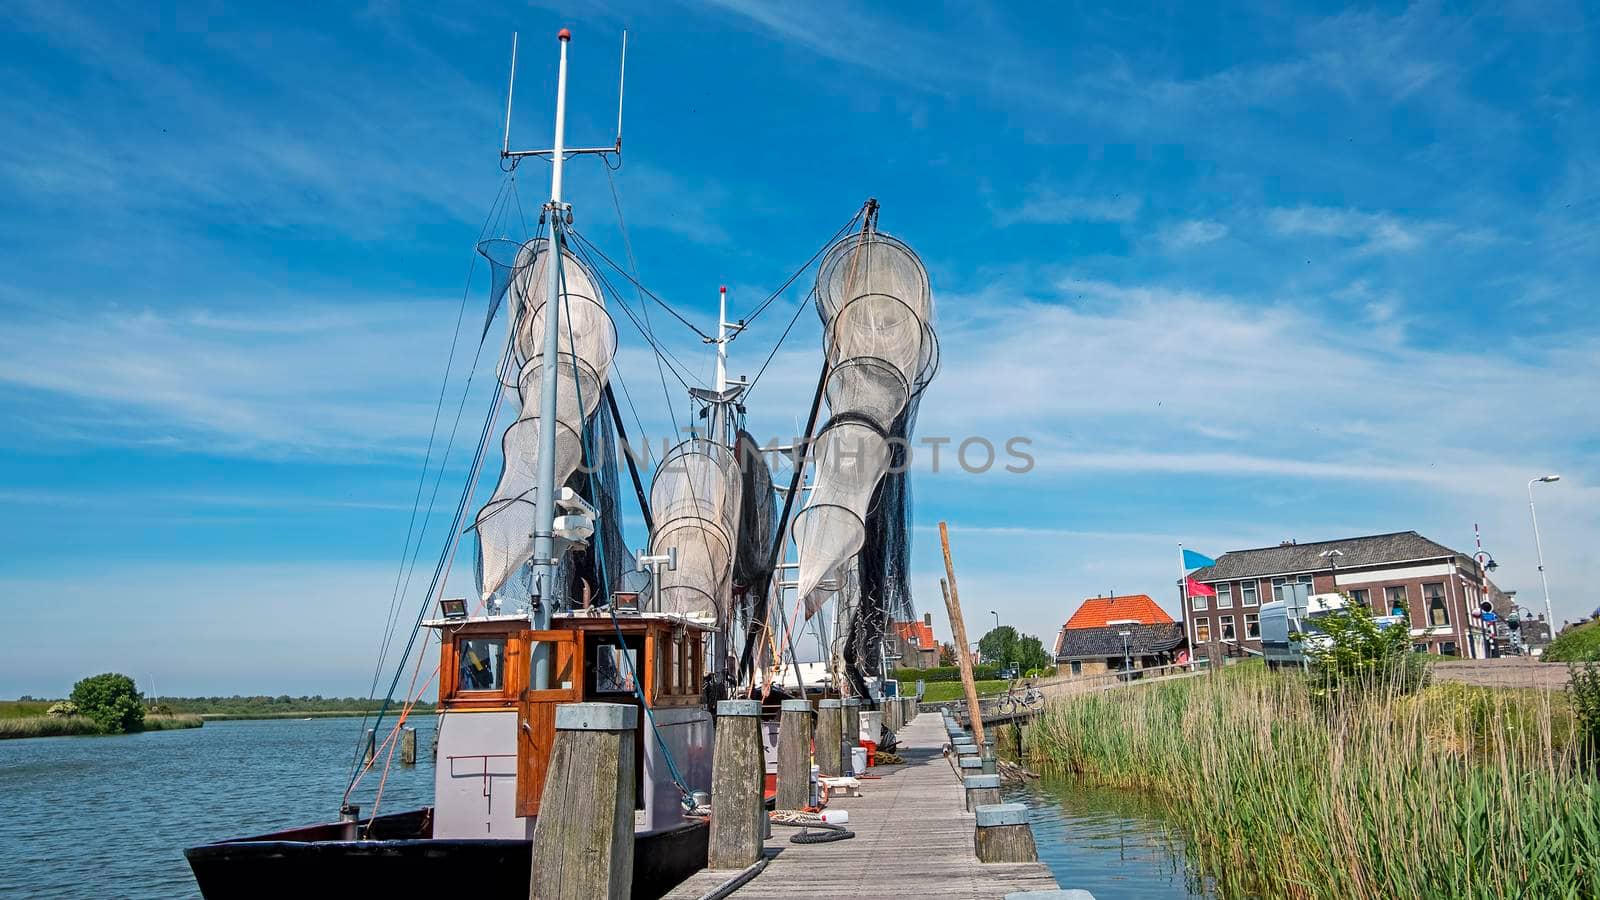 Old traditional fishing ship in the harbor from Workum in the Netherlands by devy